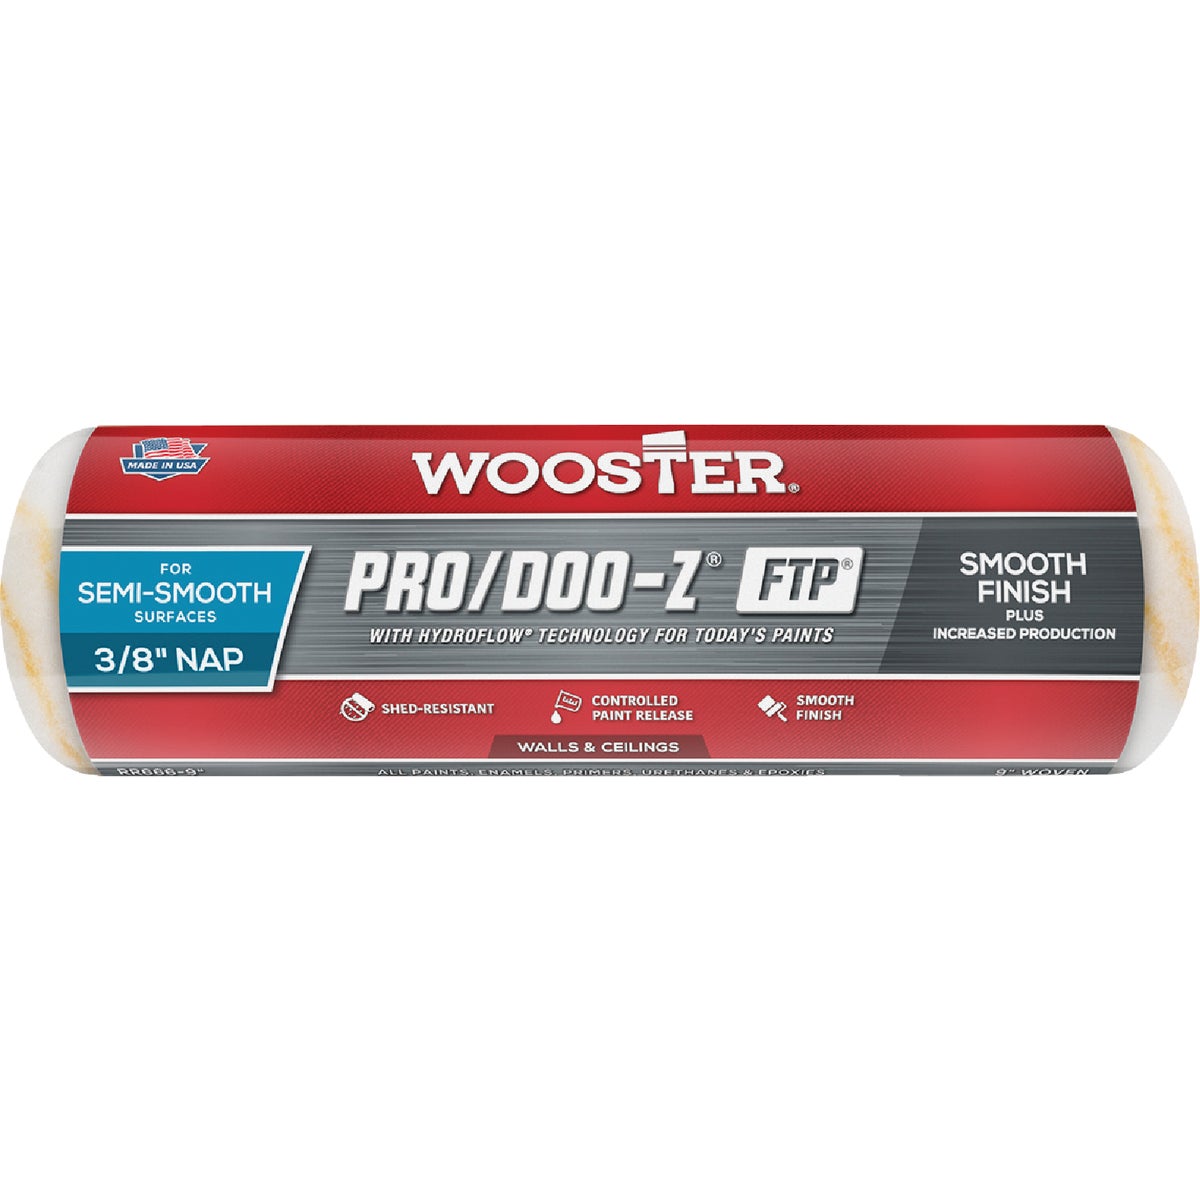 Wooster Pro/Doo-Z FTP 9 In. x 3/8 In. Woven Fabric Roller Cover